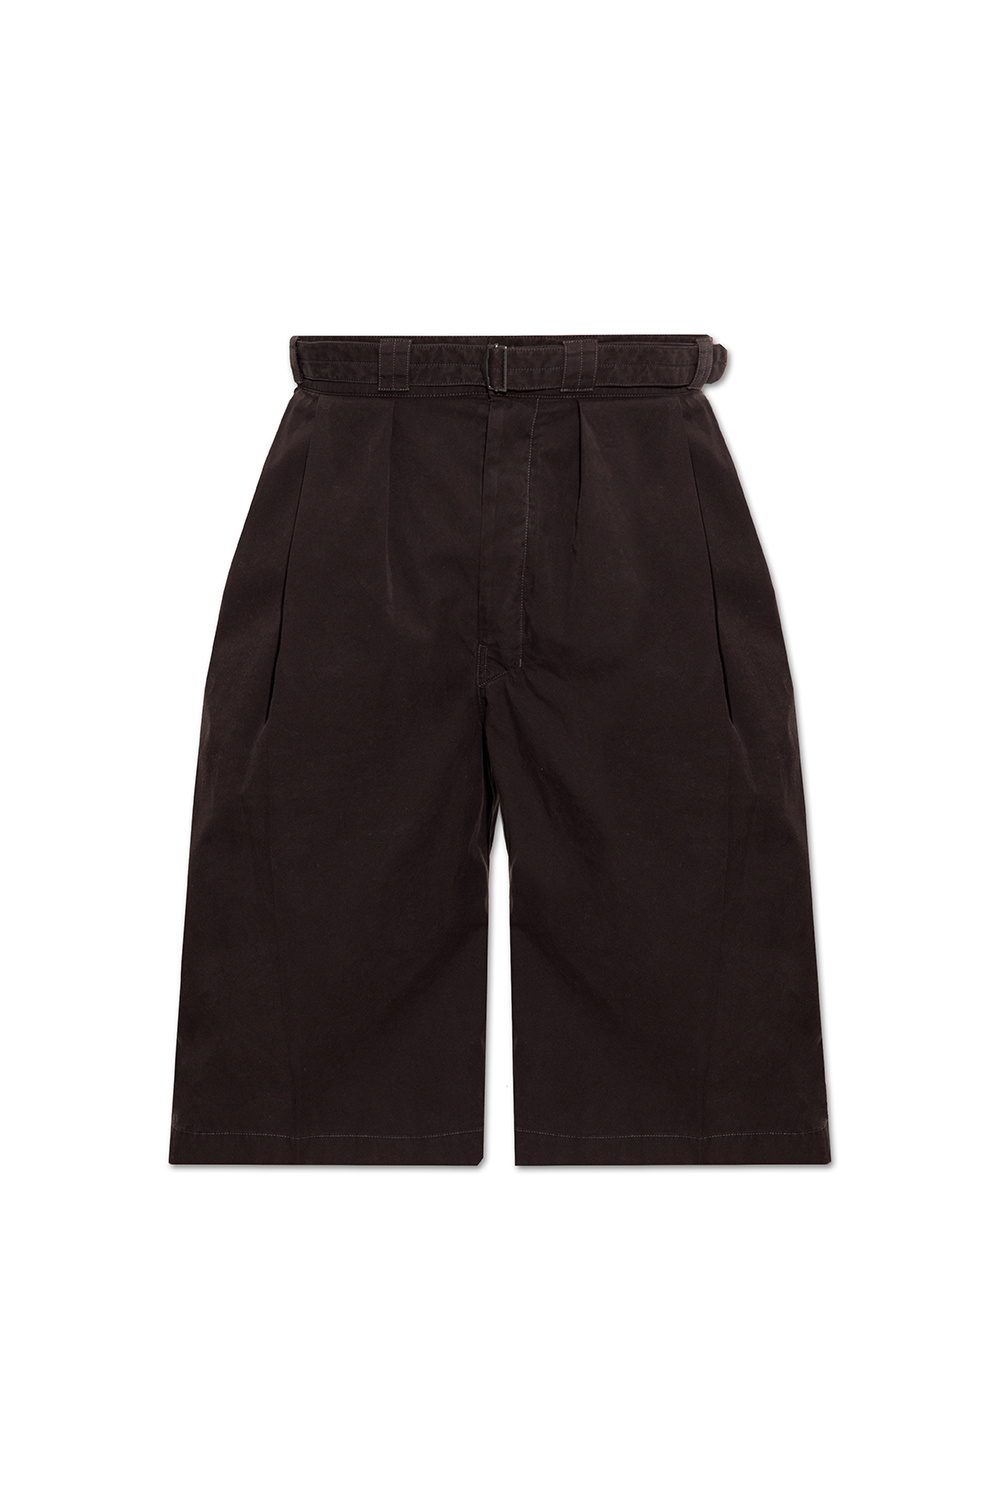 Lemaire Shorts with pockets